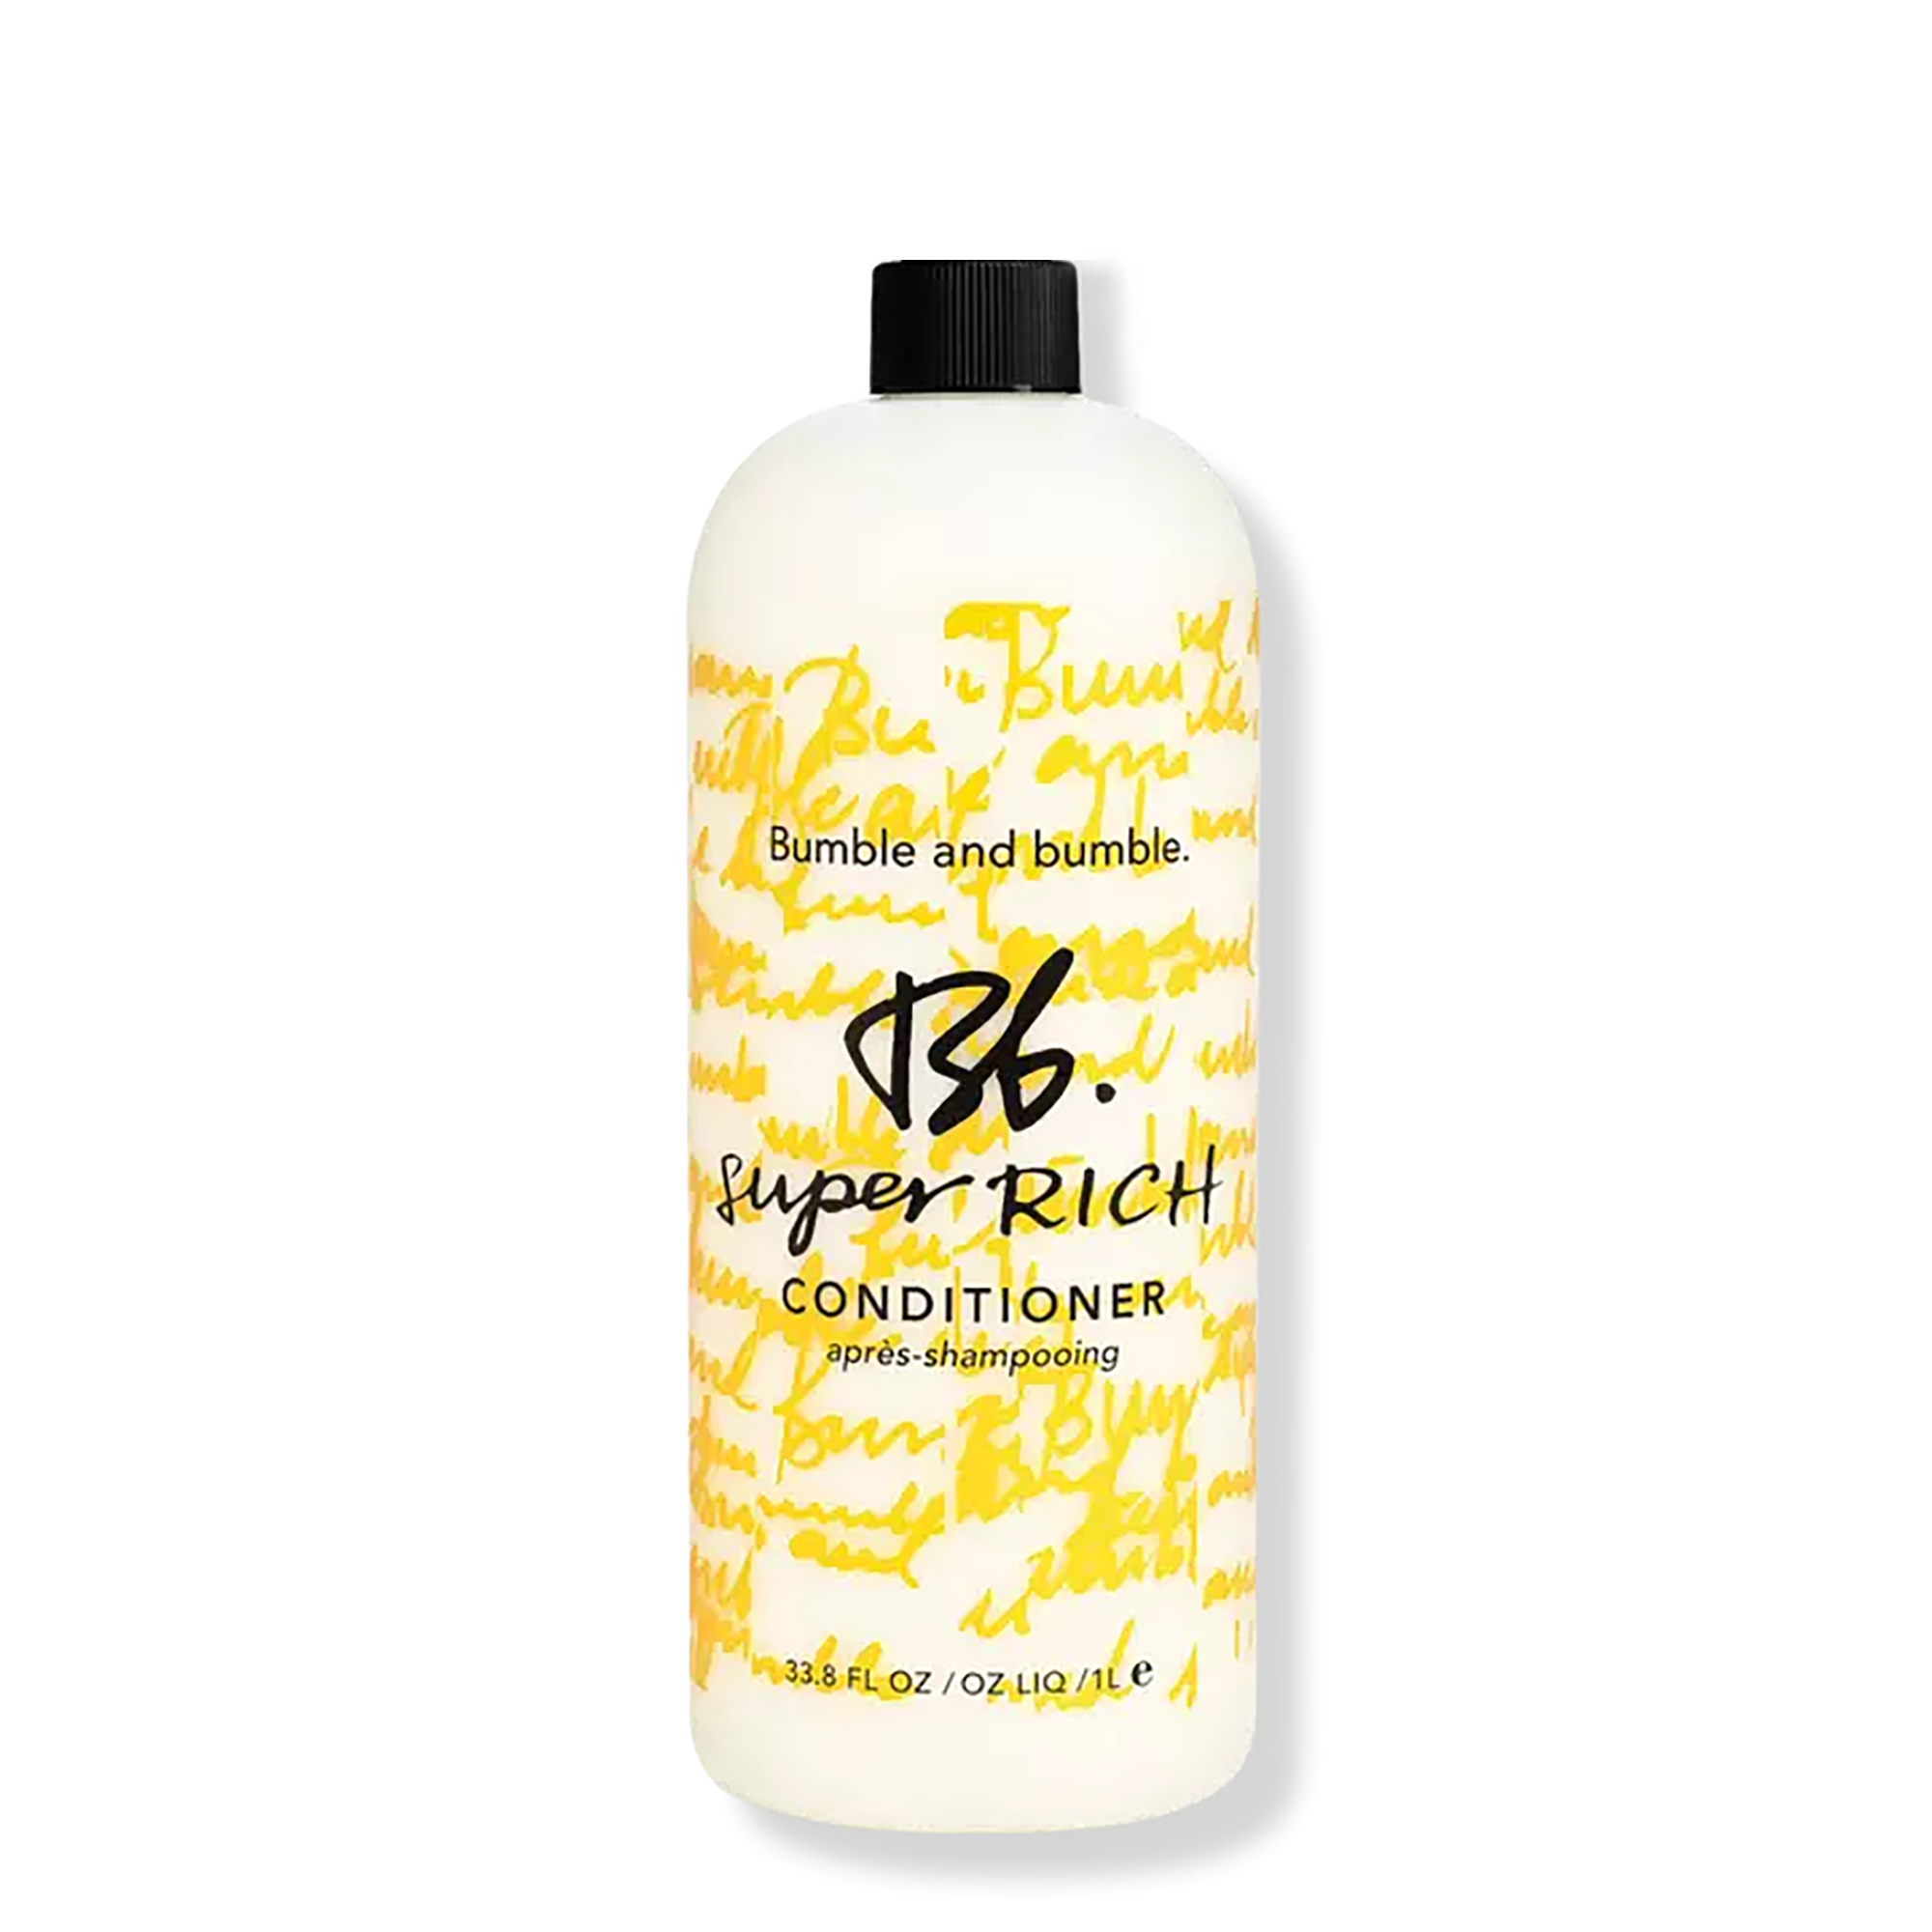 Bumble and bumble Super Rich Conditioner / 33OZ